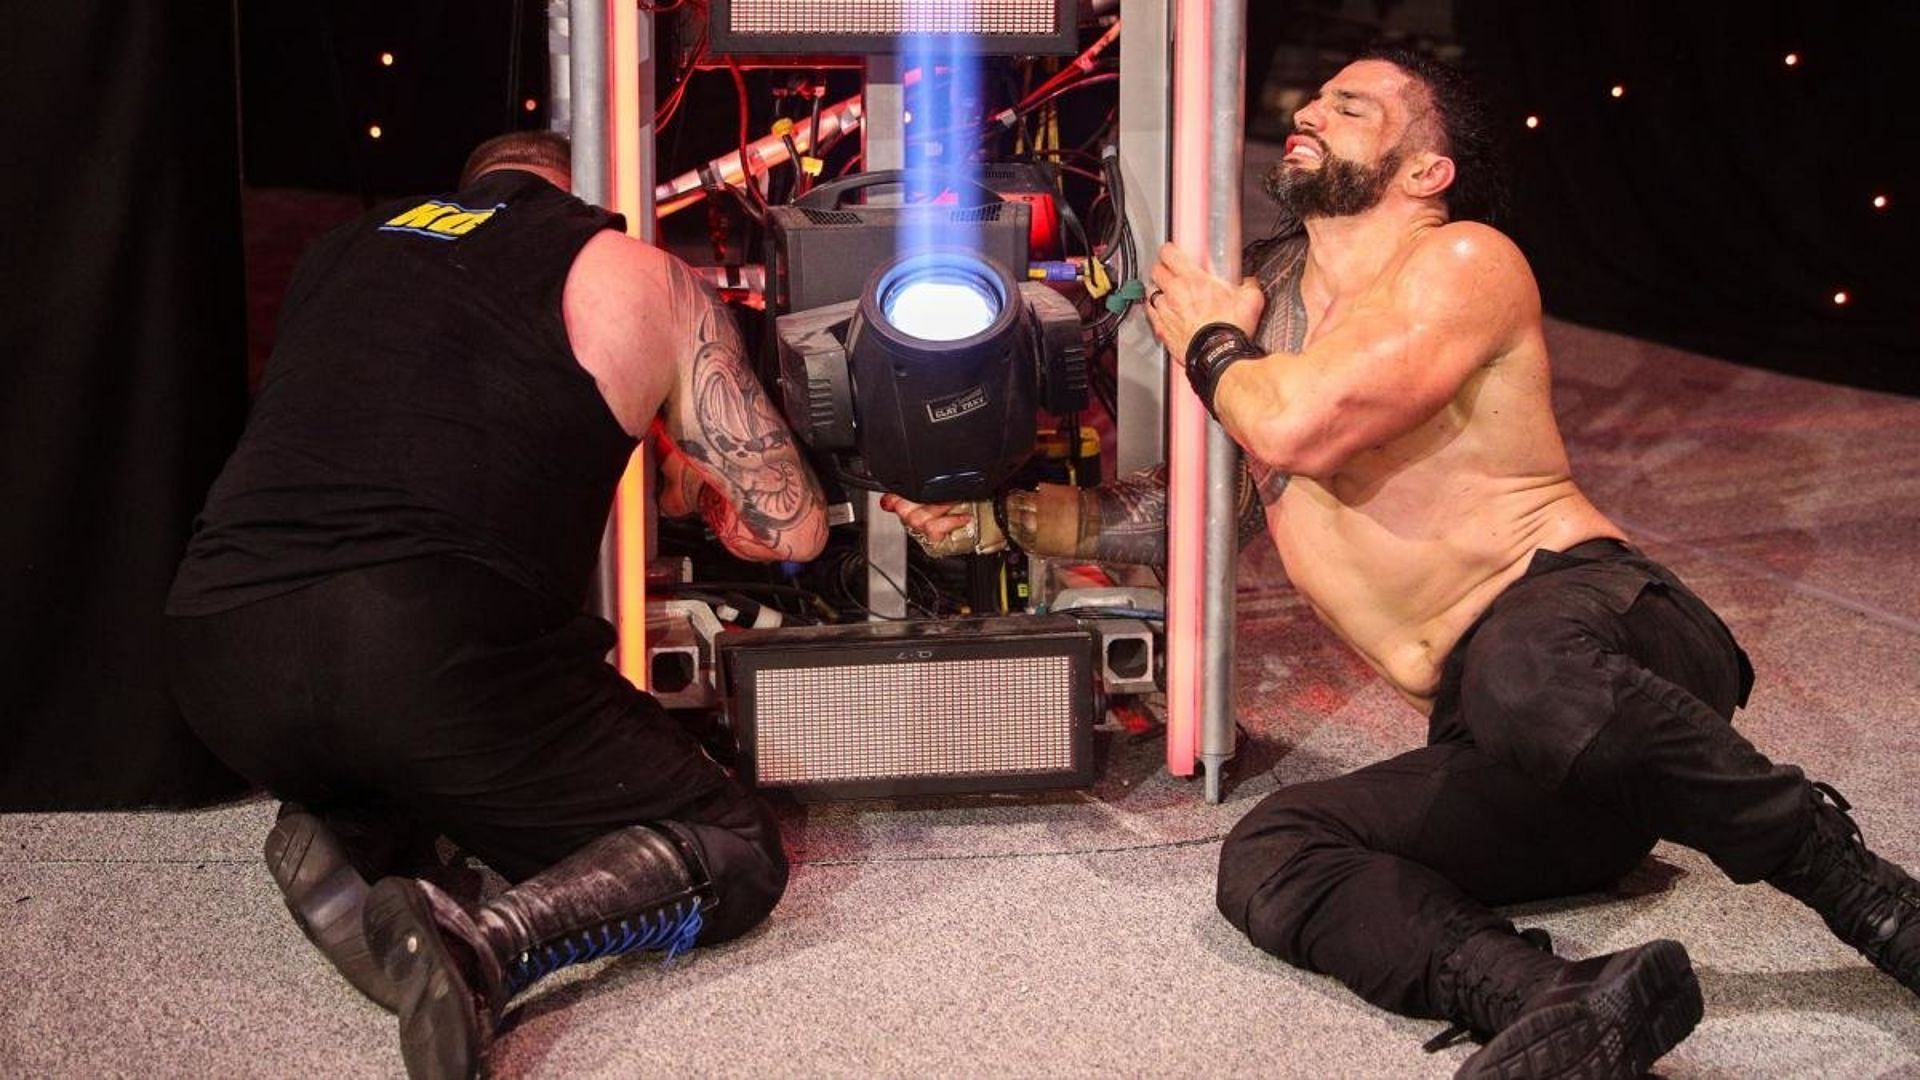 Roman Reigns and Kevin Owens fought in a Last Man Standing match at Royal Rumble 2021.